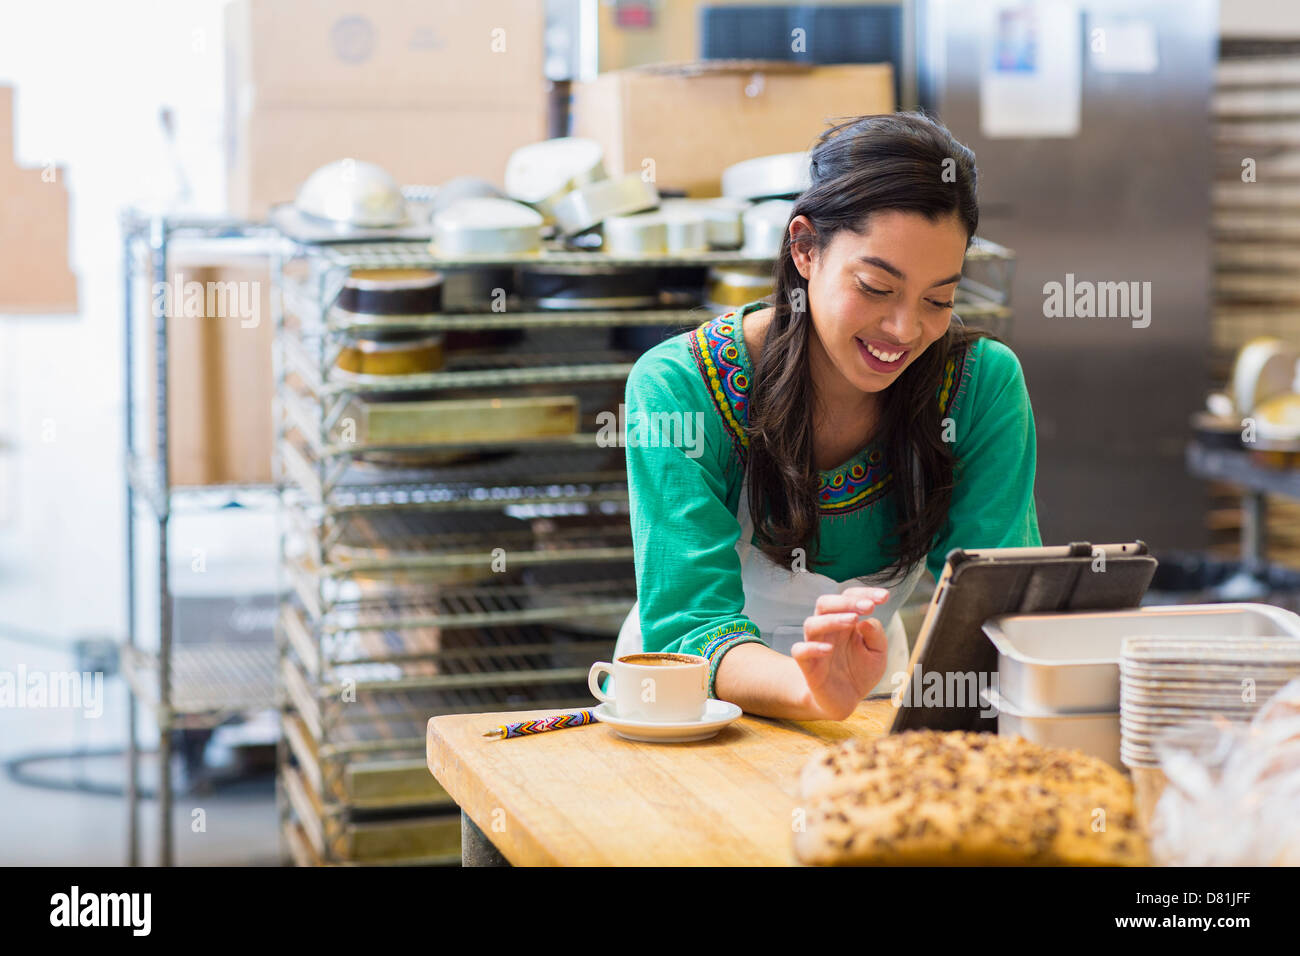 Mixed Race woman working in kitchen Banque D'Images